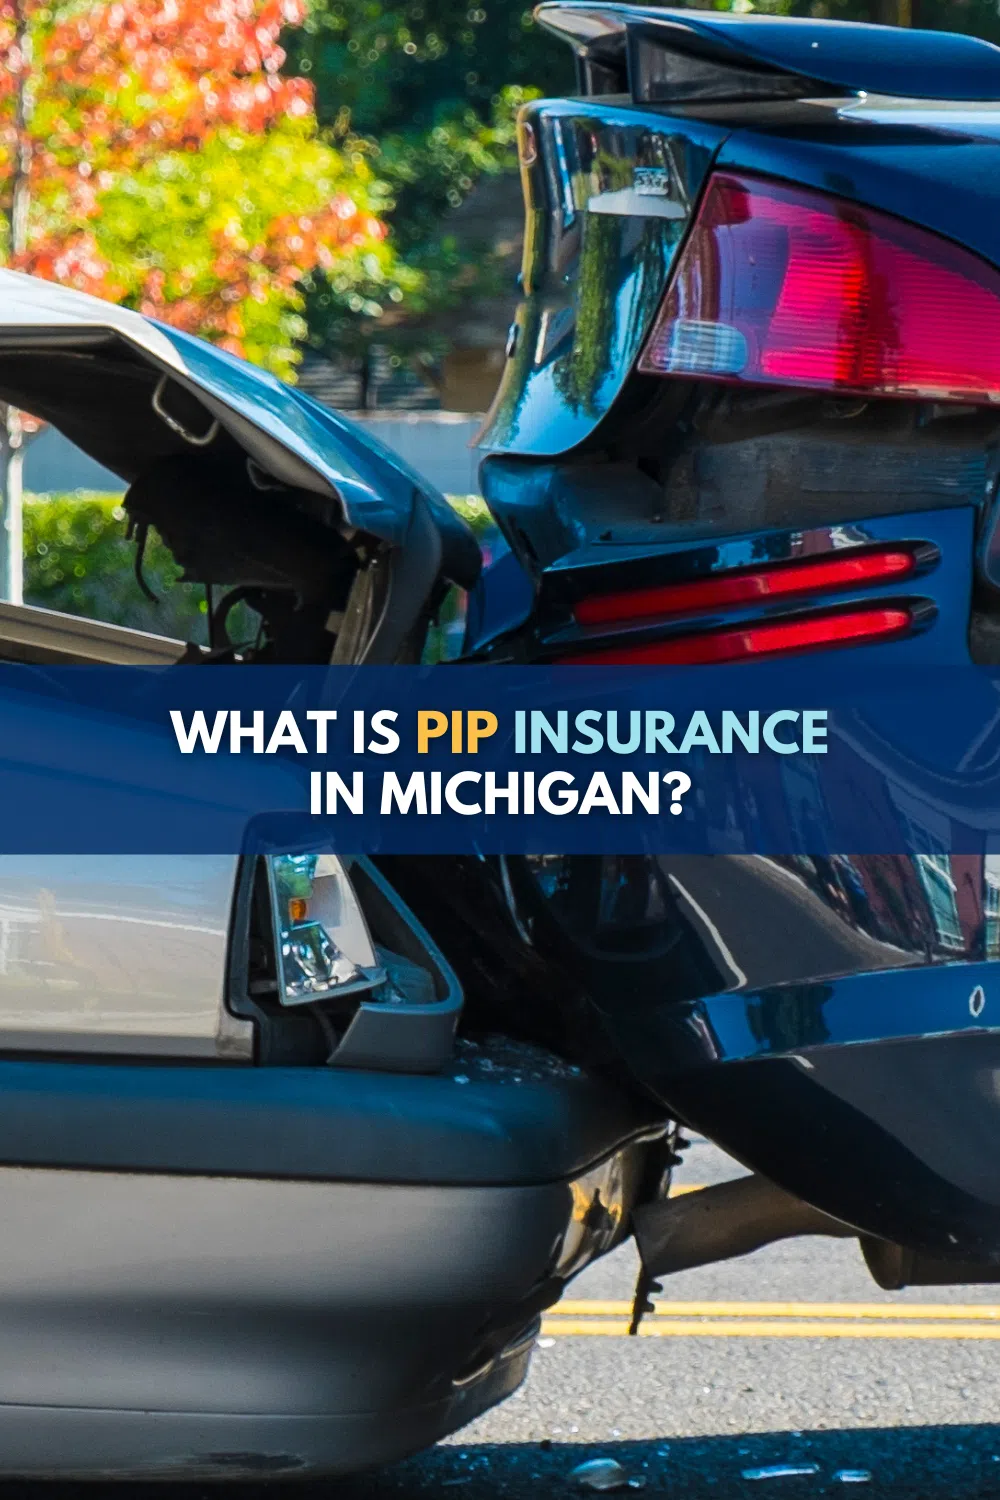 What is PIP Insurance in Michigan (Personal Injury Protection Insurance)?